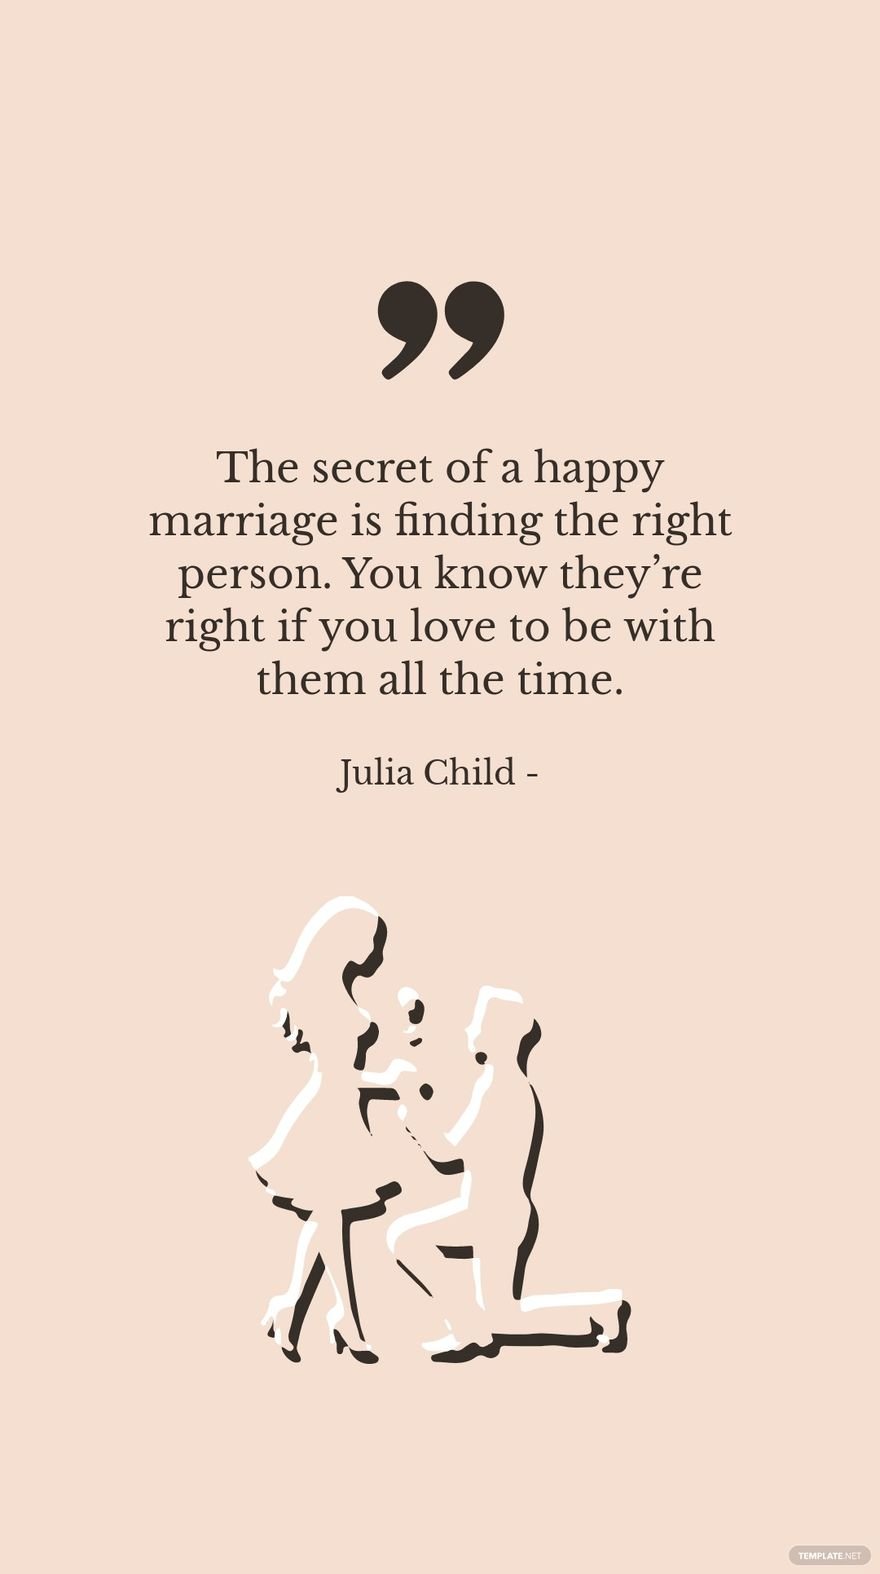 Julia Child - The secret of a happy marriage is finding the right person. You know they’re right if you love to be with them all the time.